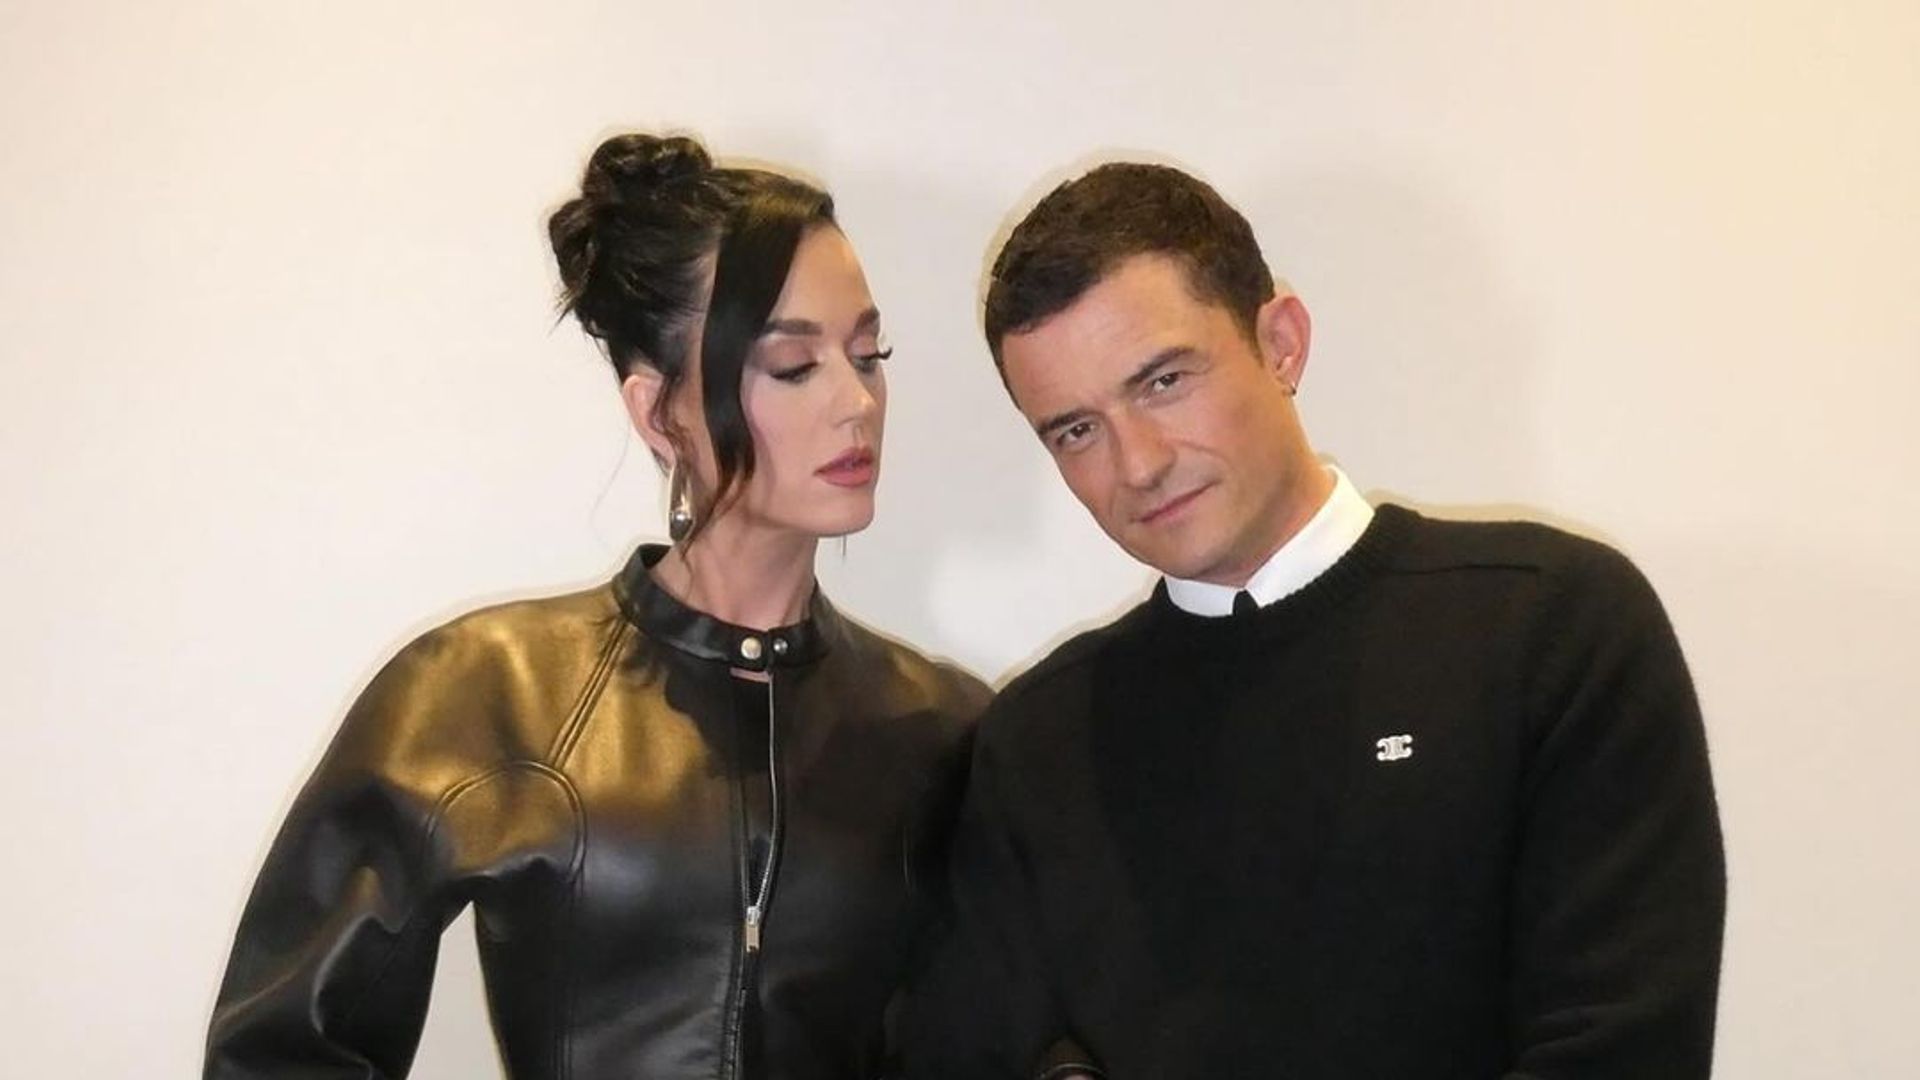 Katy Perry shows hilarious domestic reality of relationship with Orlando Bloom amid his daring stunts